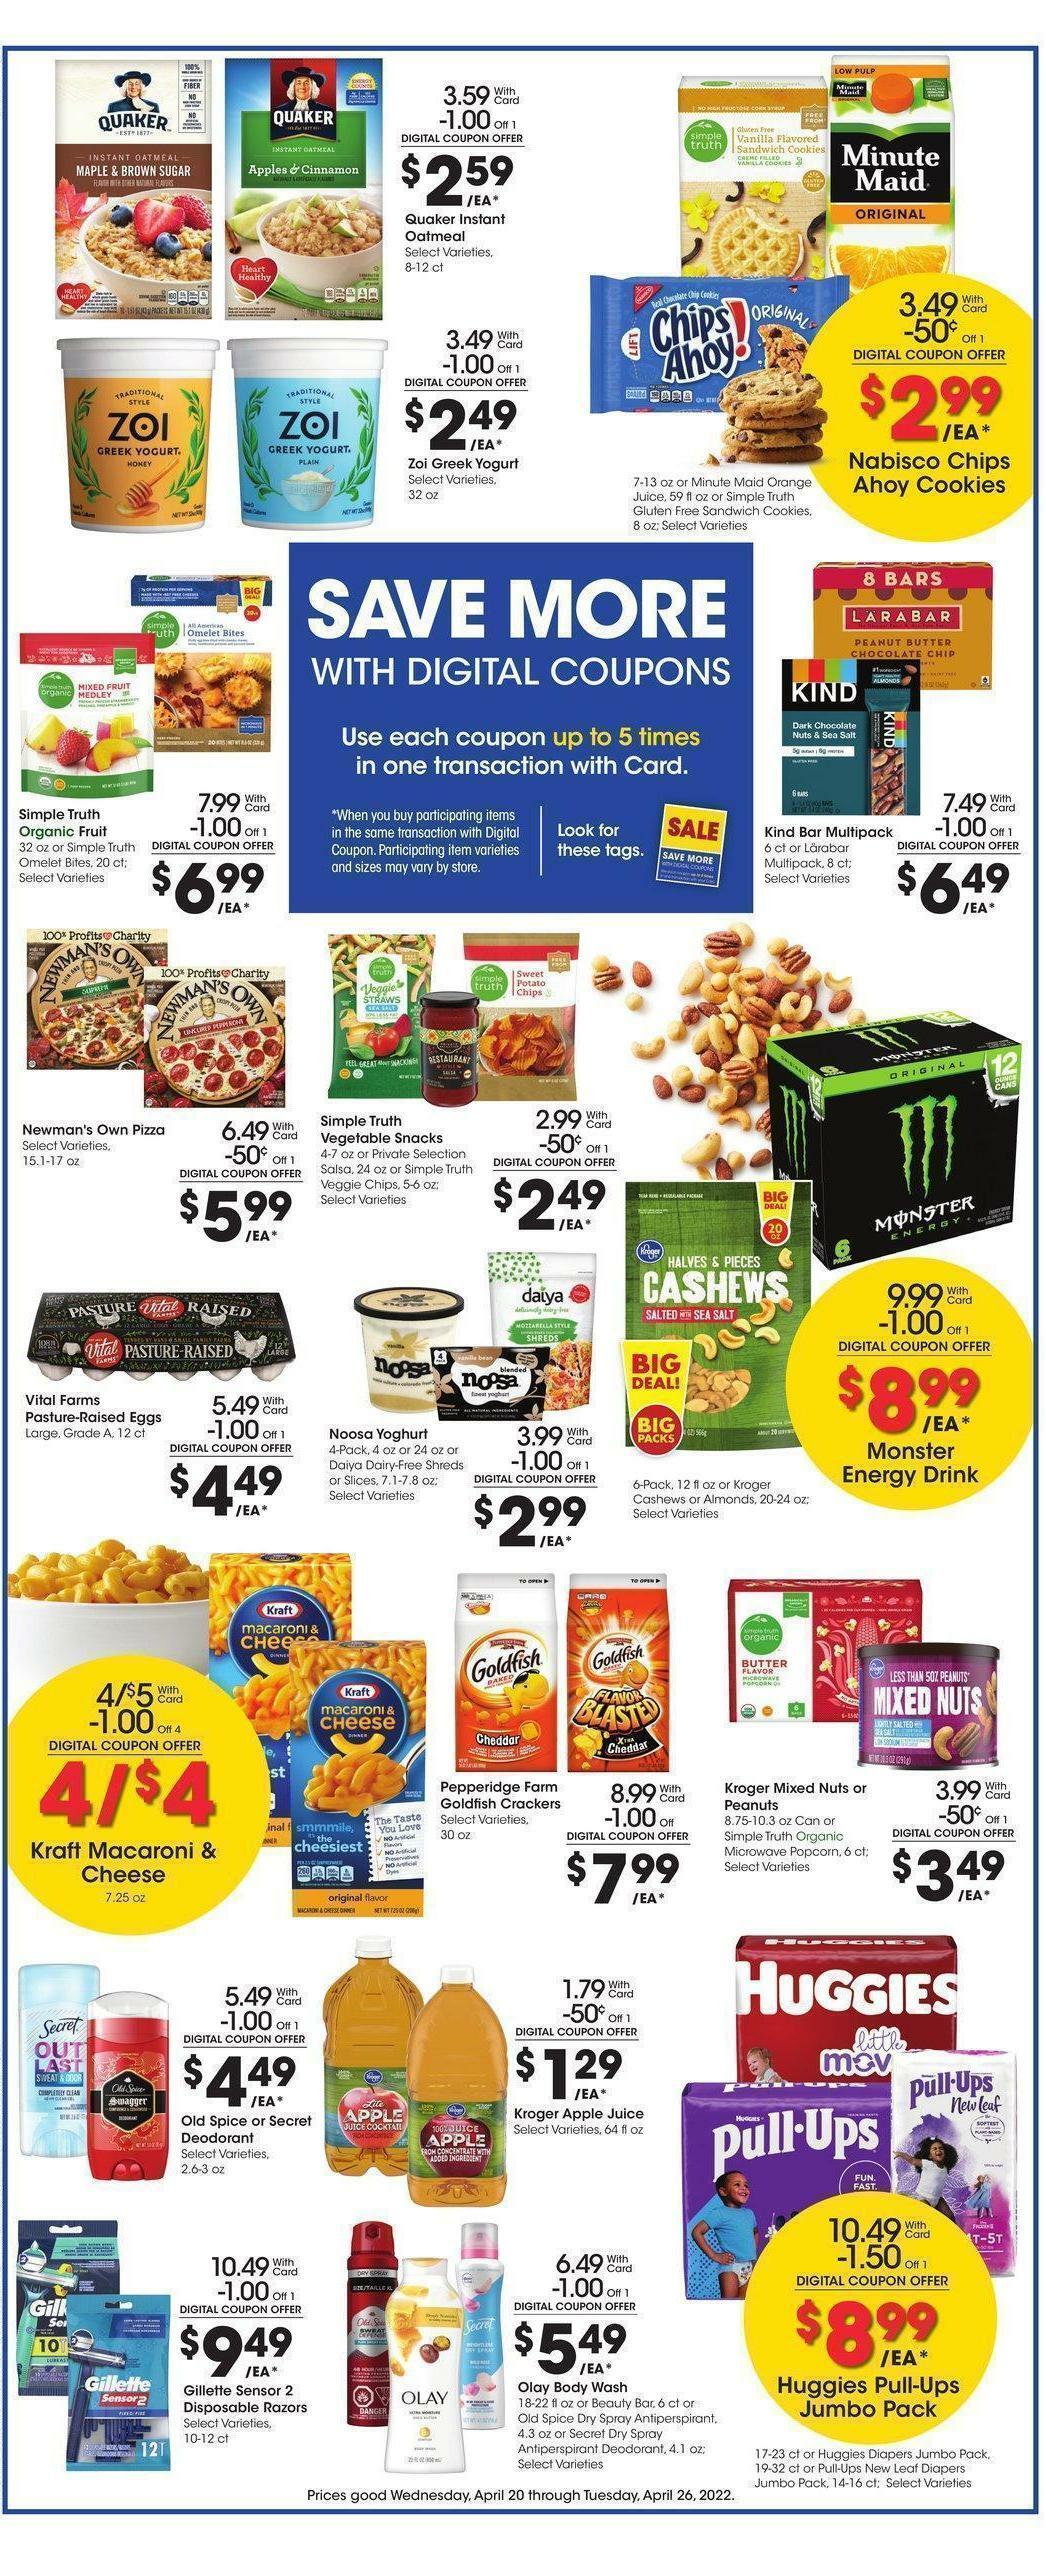 Fred Meyer Weekly Ad from April 20